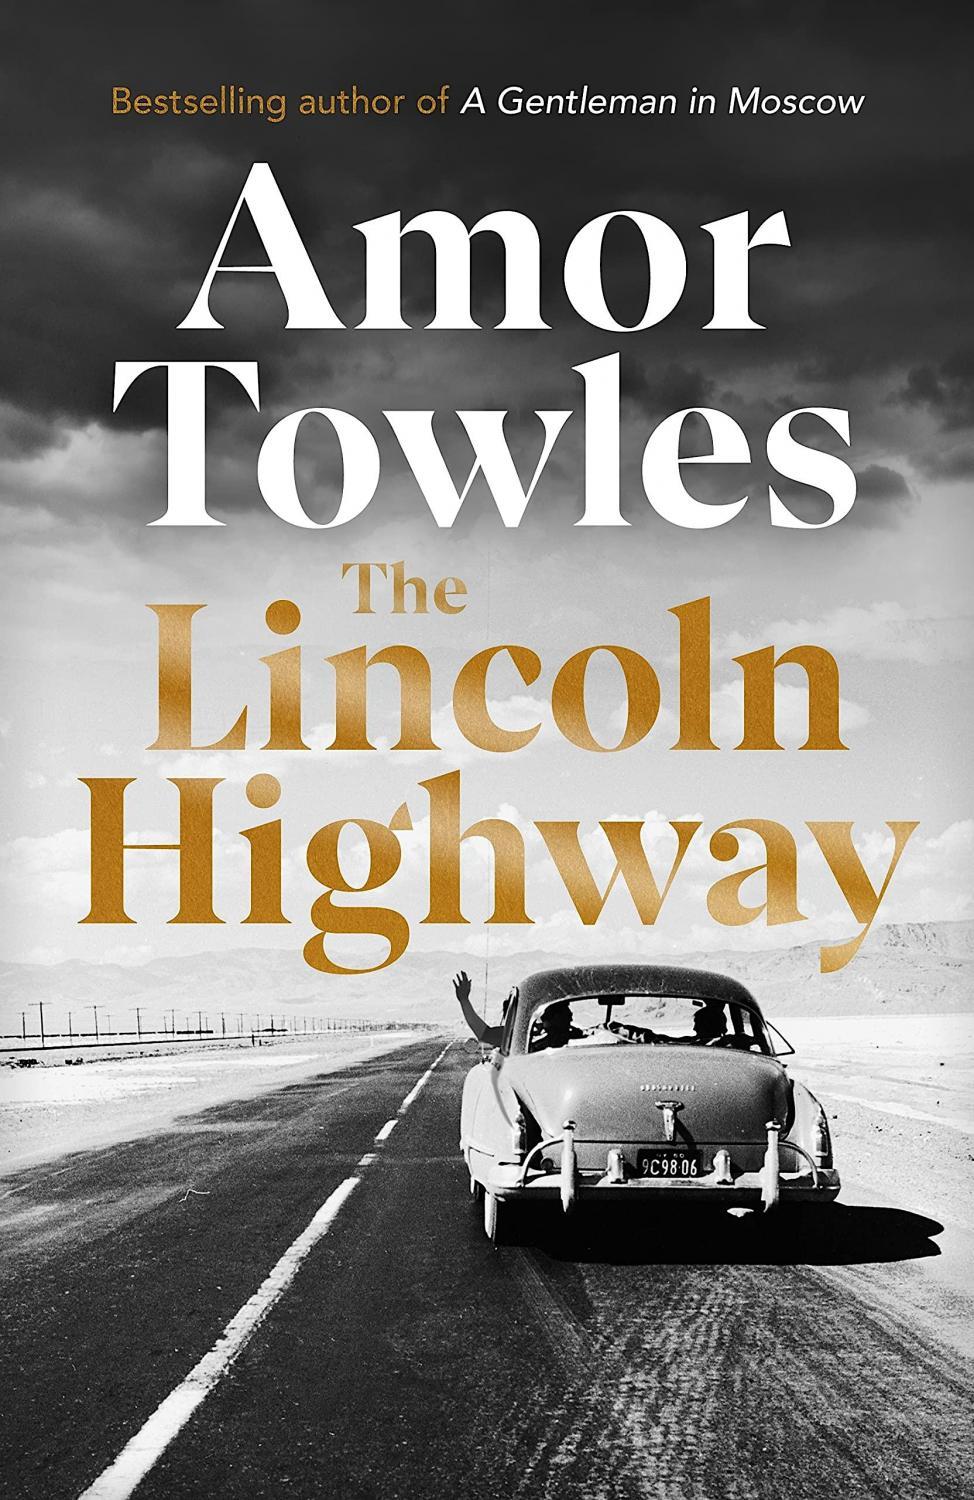 Library Book Group: The Lincoln Highway by Towles
Thu Oct 20, 6:30 PM - Thu Oct 20, 7:30 PM
in 3 days